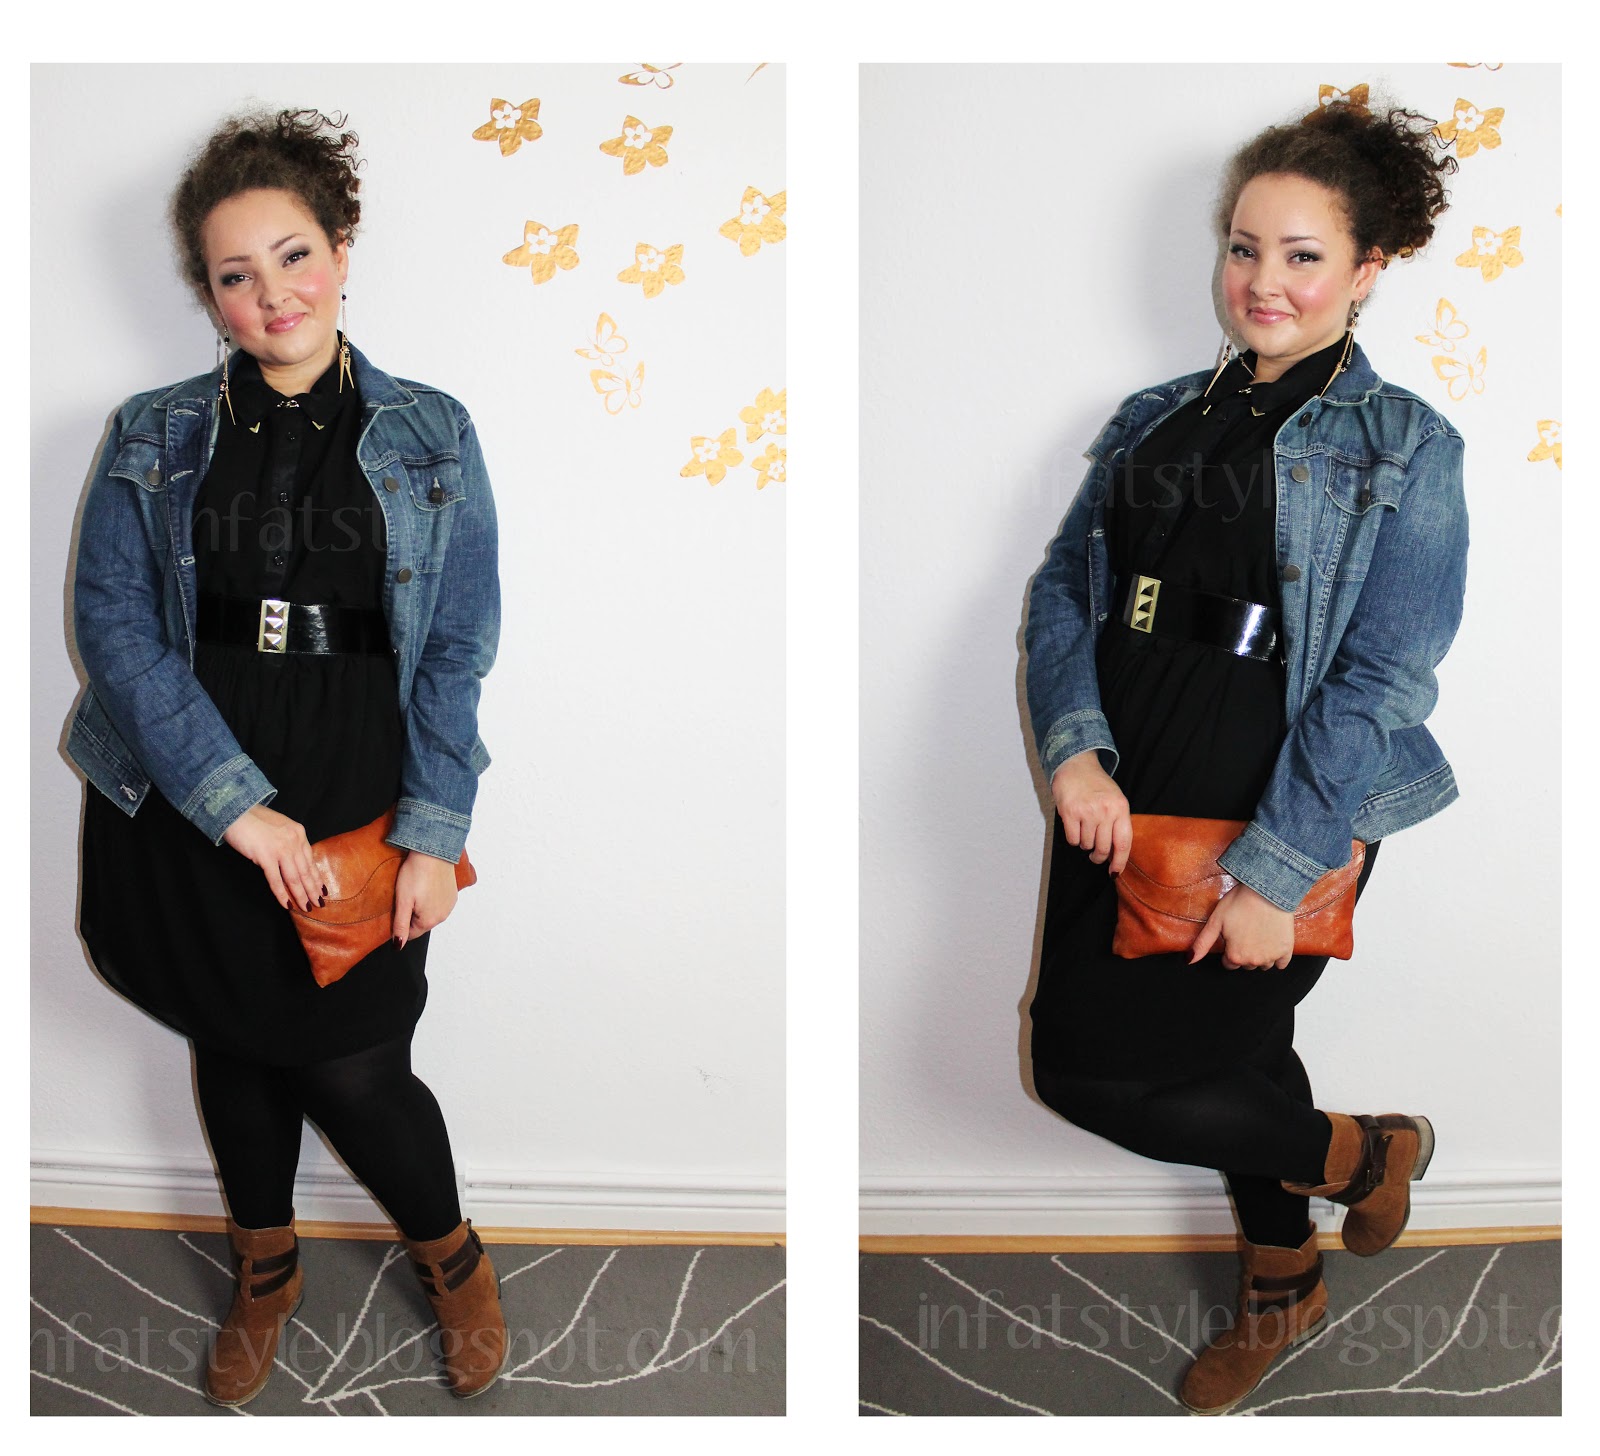 One Outfit Styled Two Ways — WOAHSTYLE